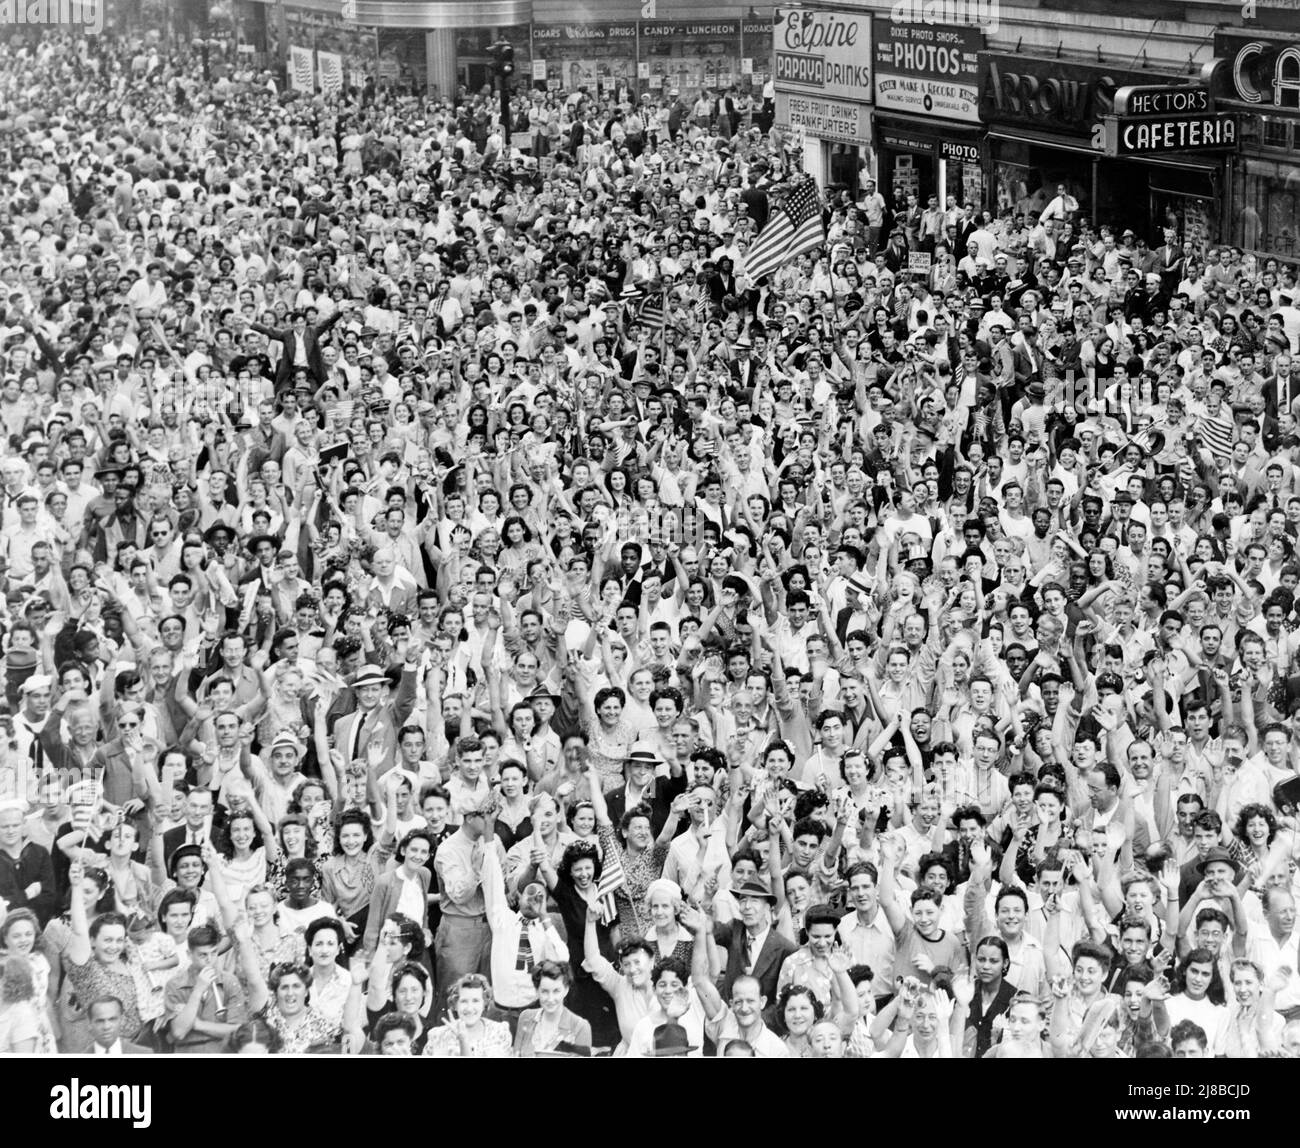 Crowds celebrating VJ Day (Victory over Japan Day), which marked the end of fighting in WW2, in the streets of New York Stock Photo